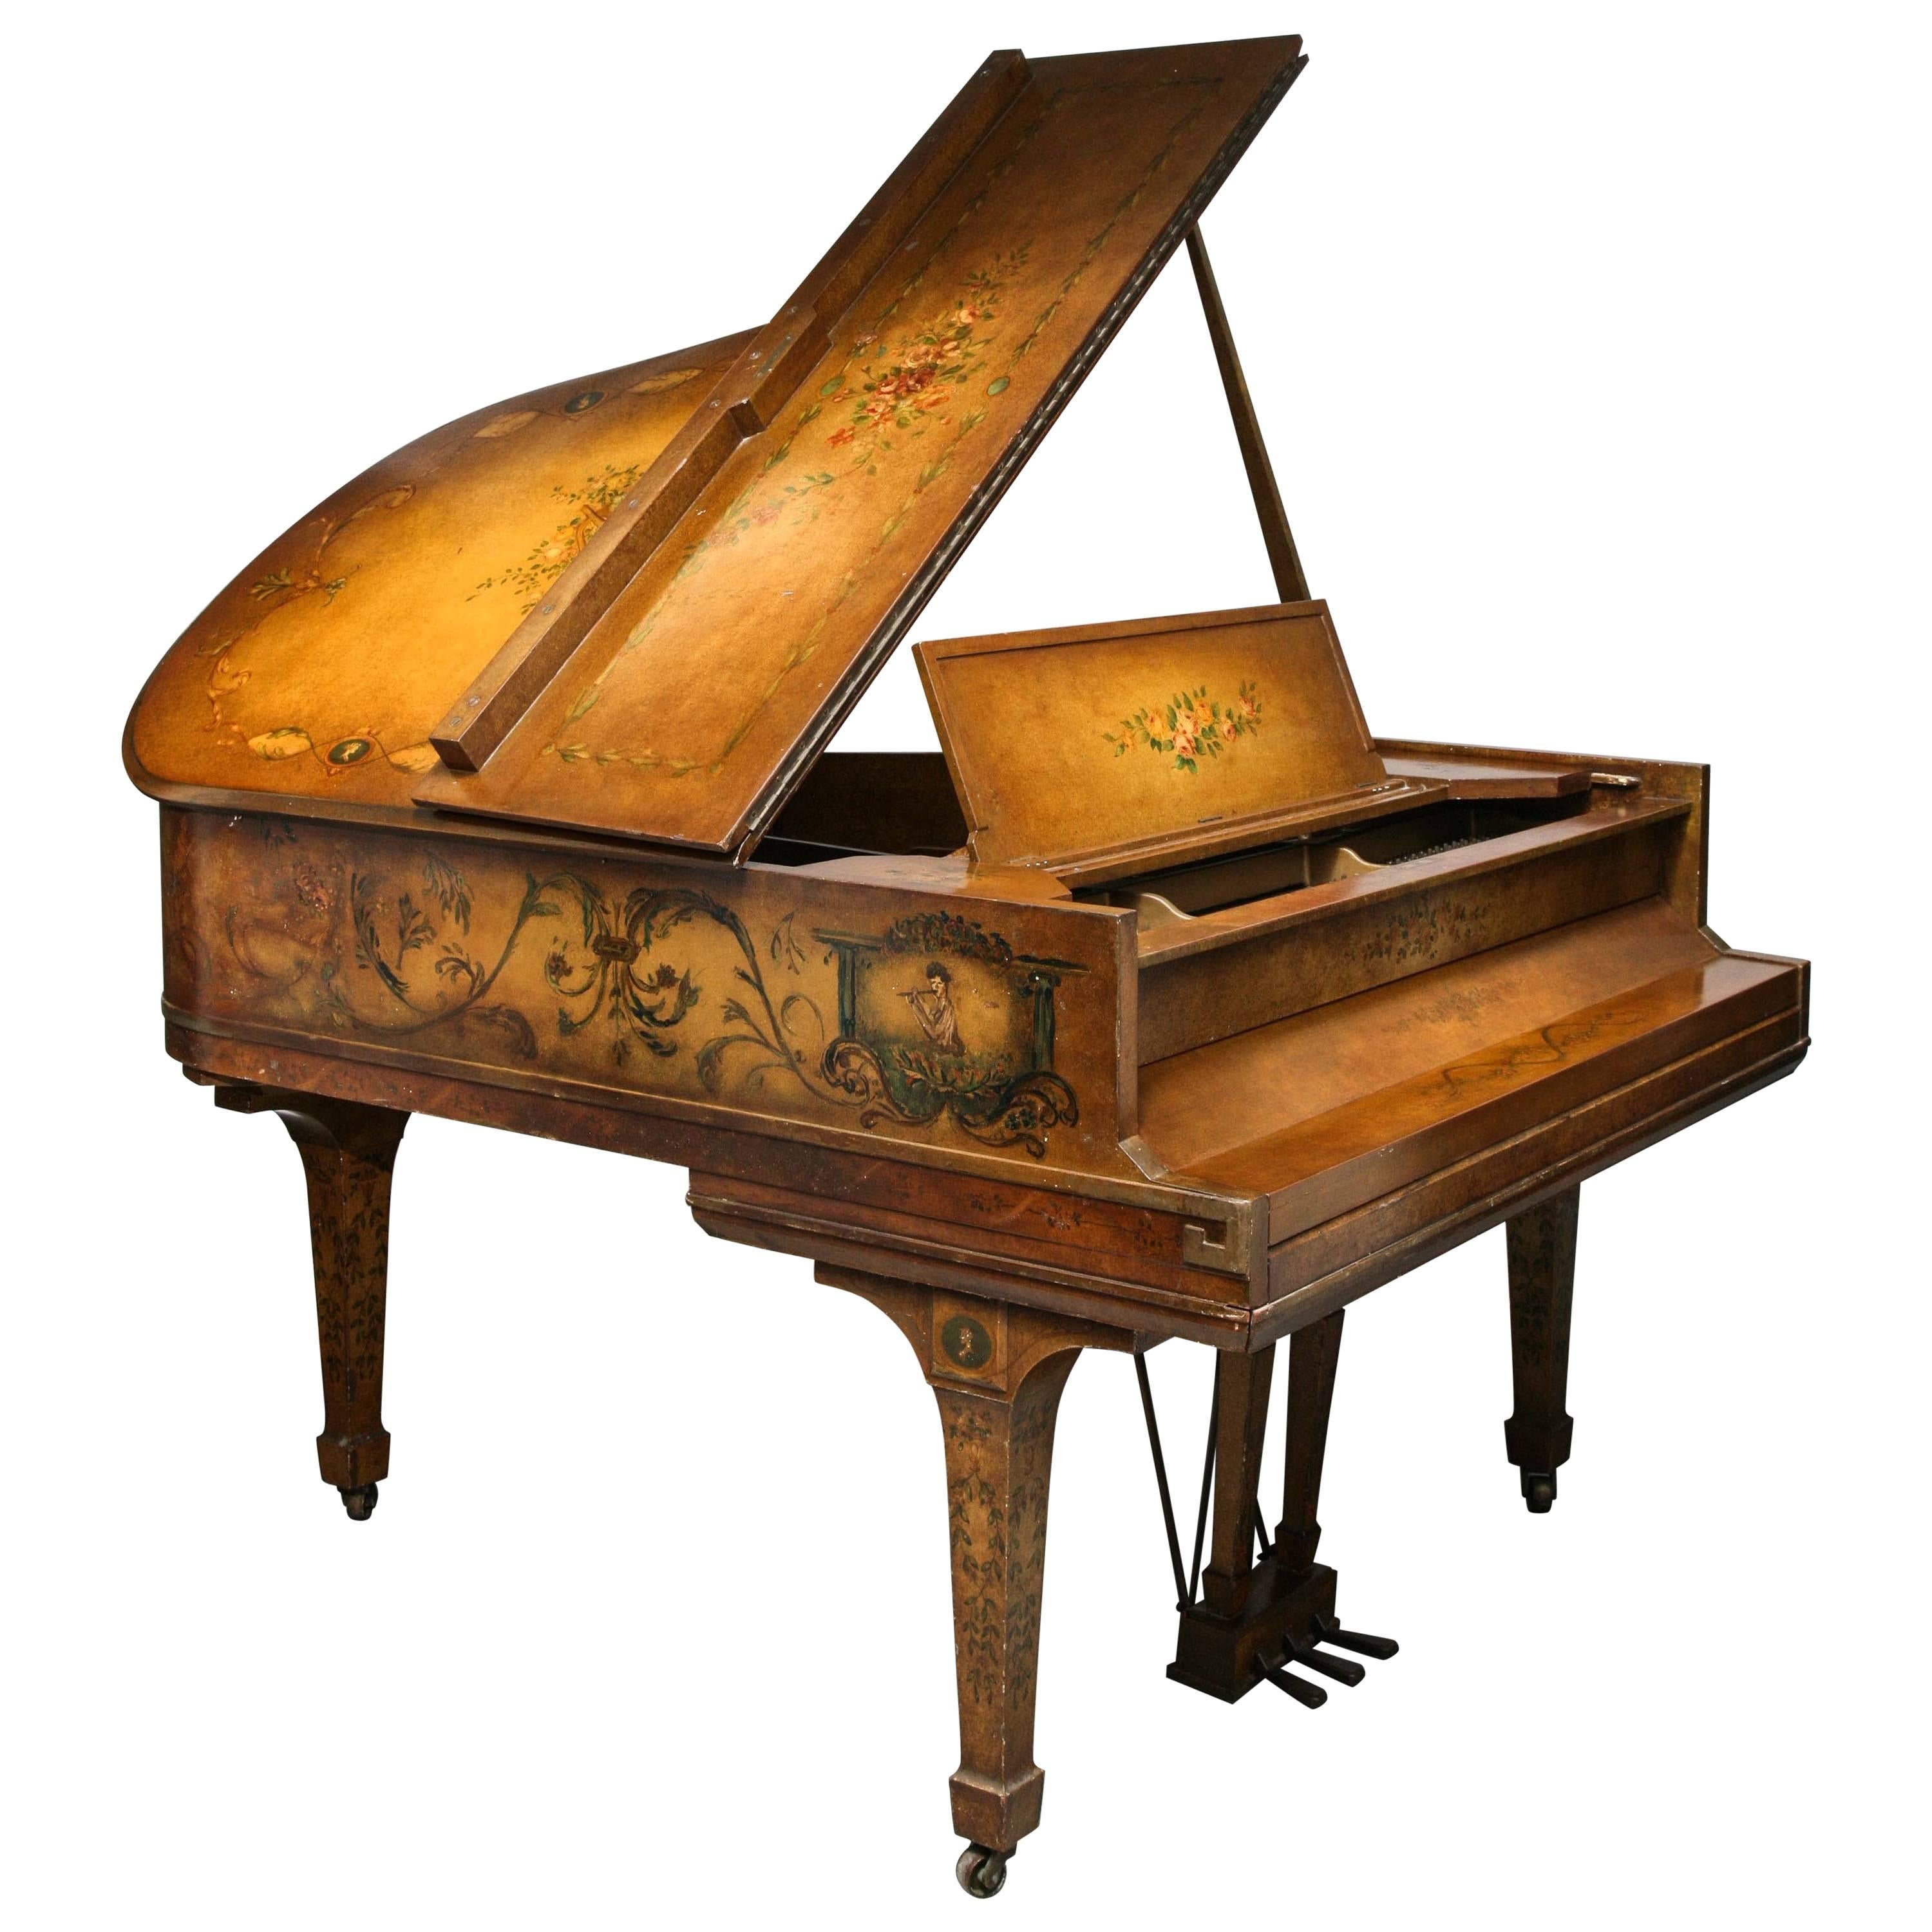 Superb Baby Grand Piano with Painted Scenes by Sohmer, NY